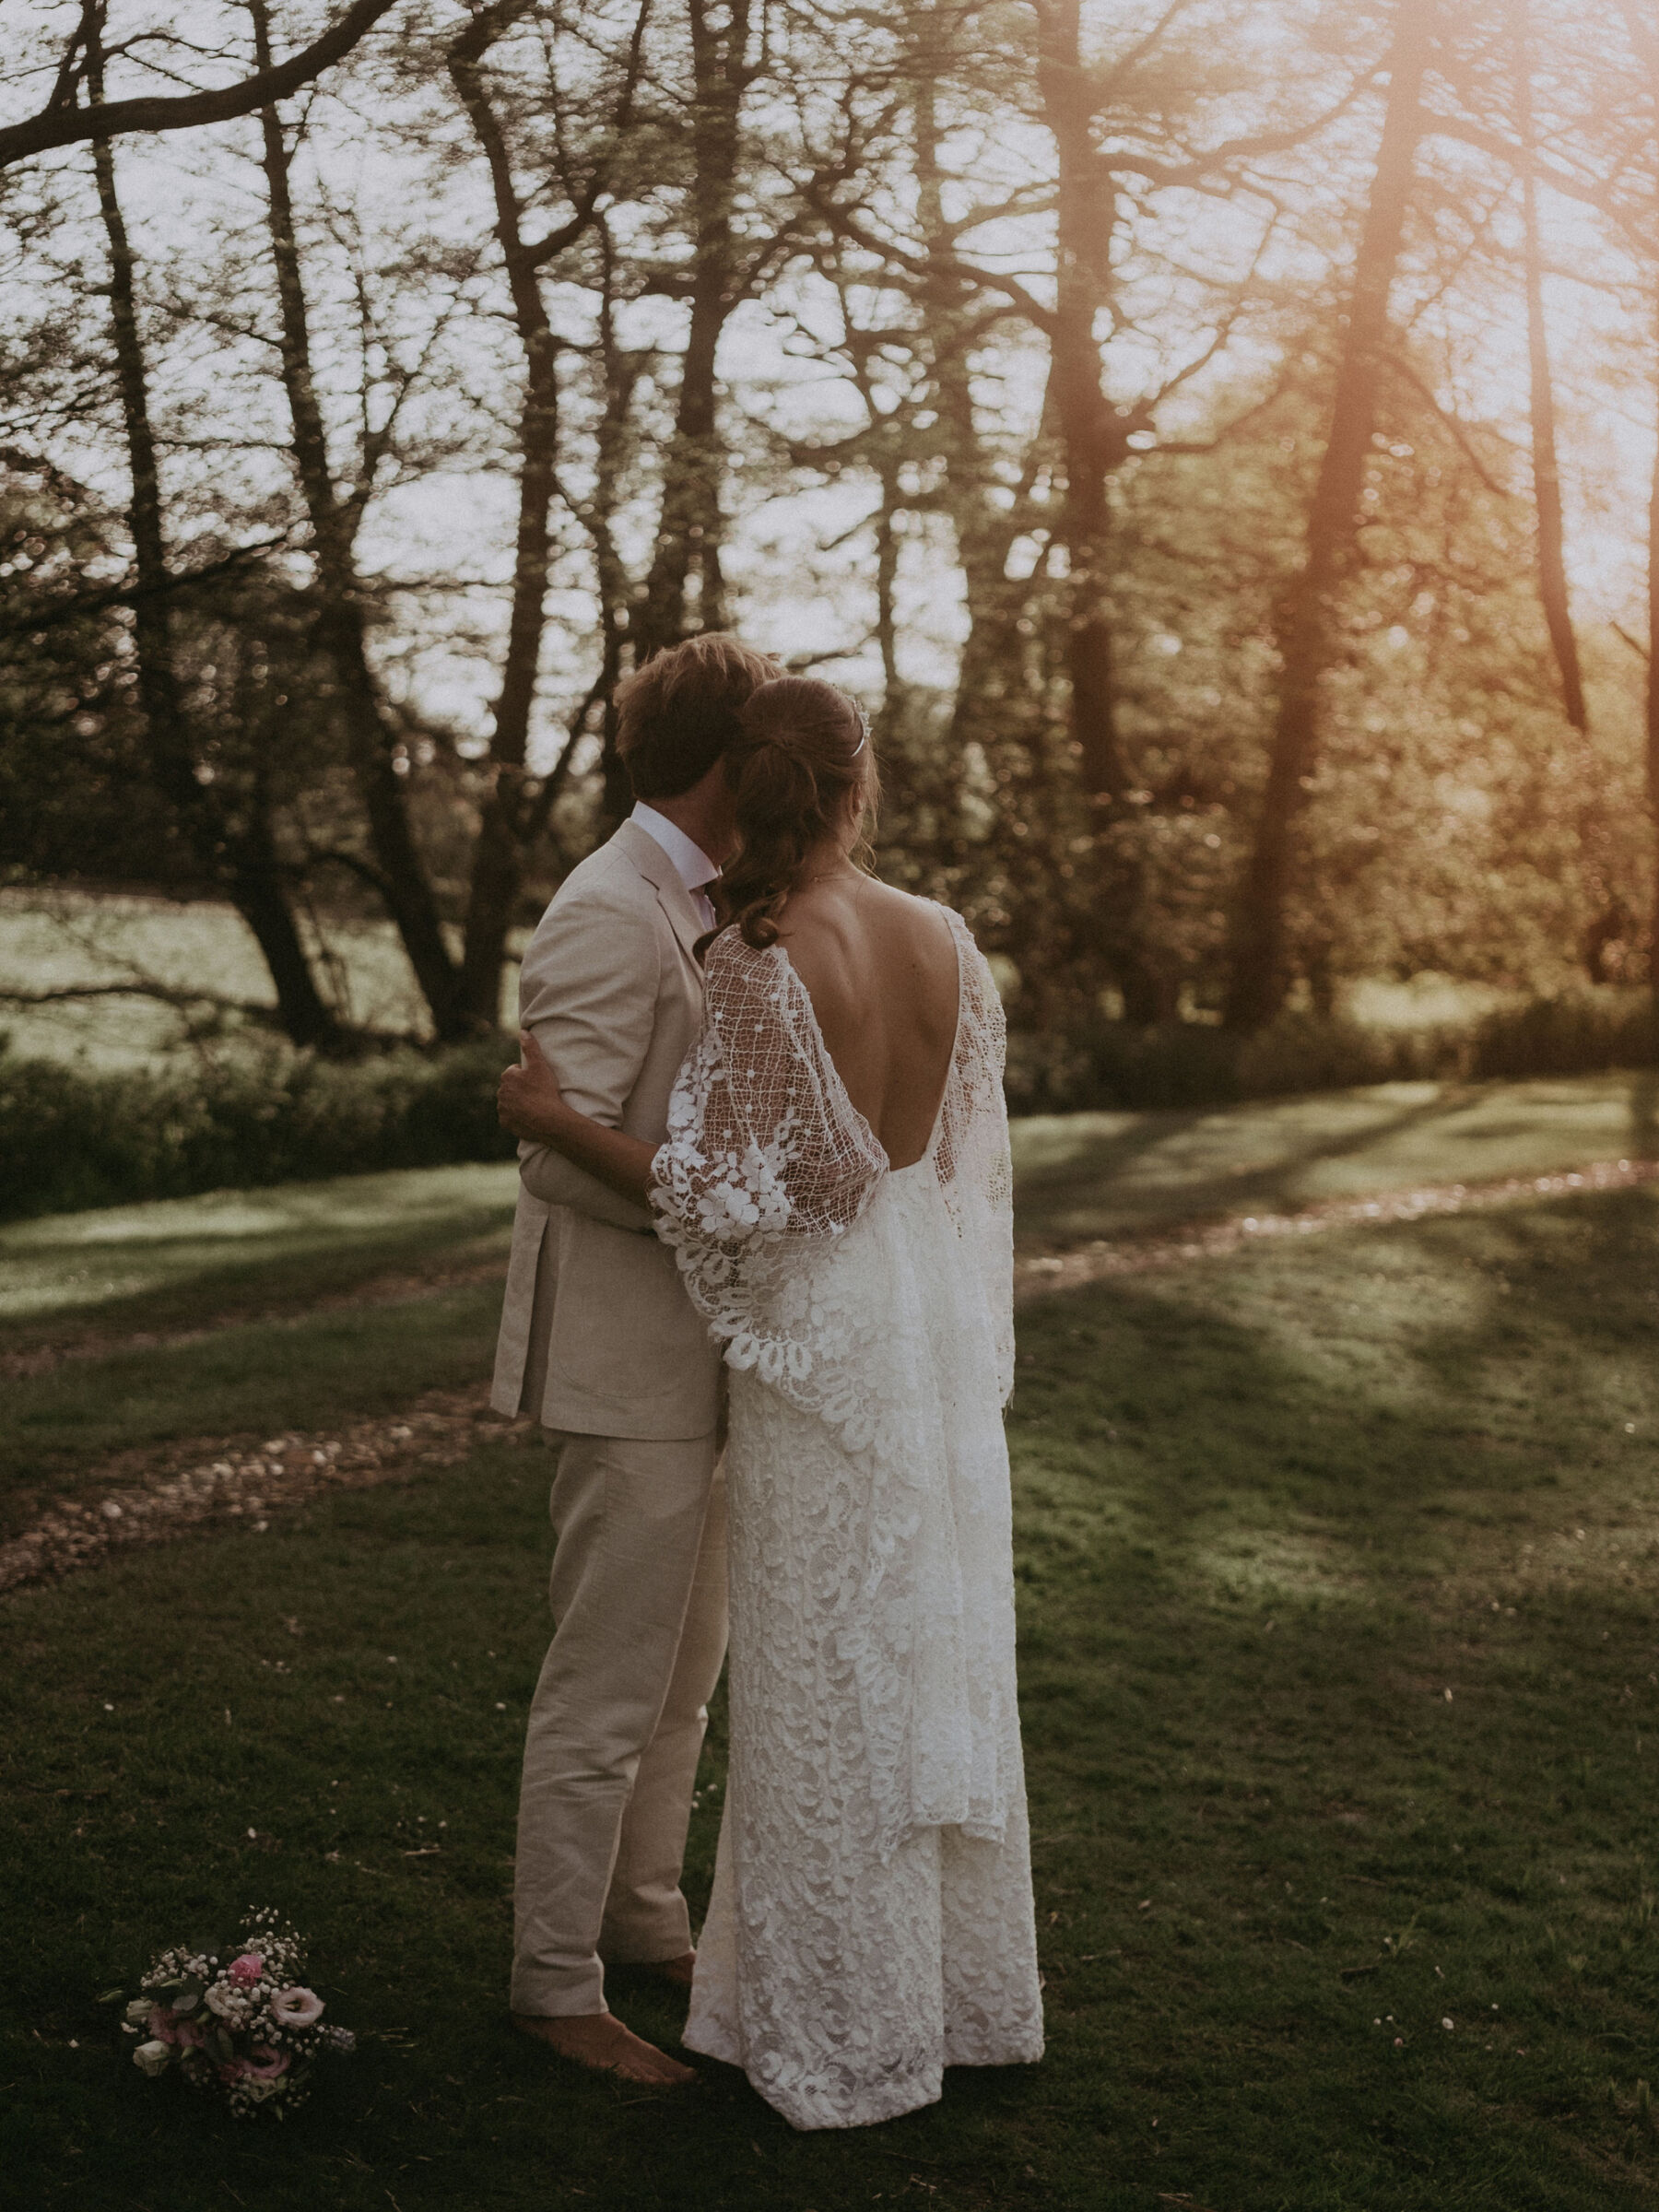 Bride and groom at golden hour, bride wears a Grace Loves Lace wedding dress